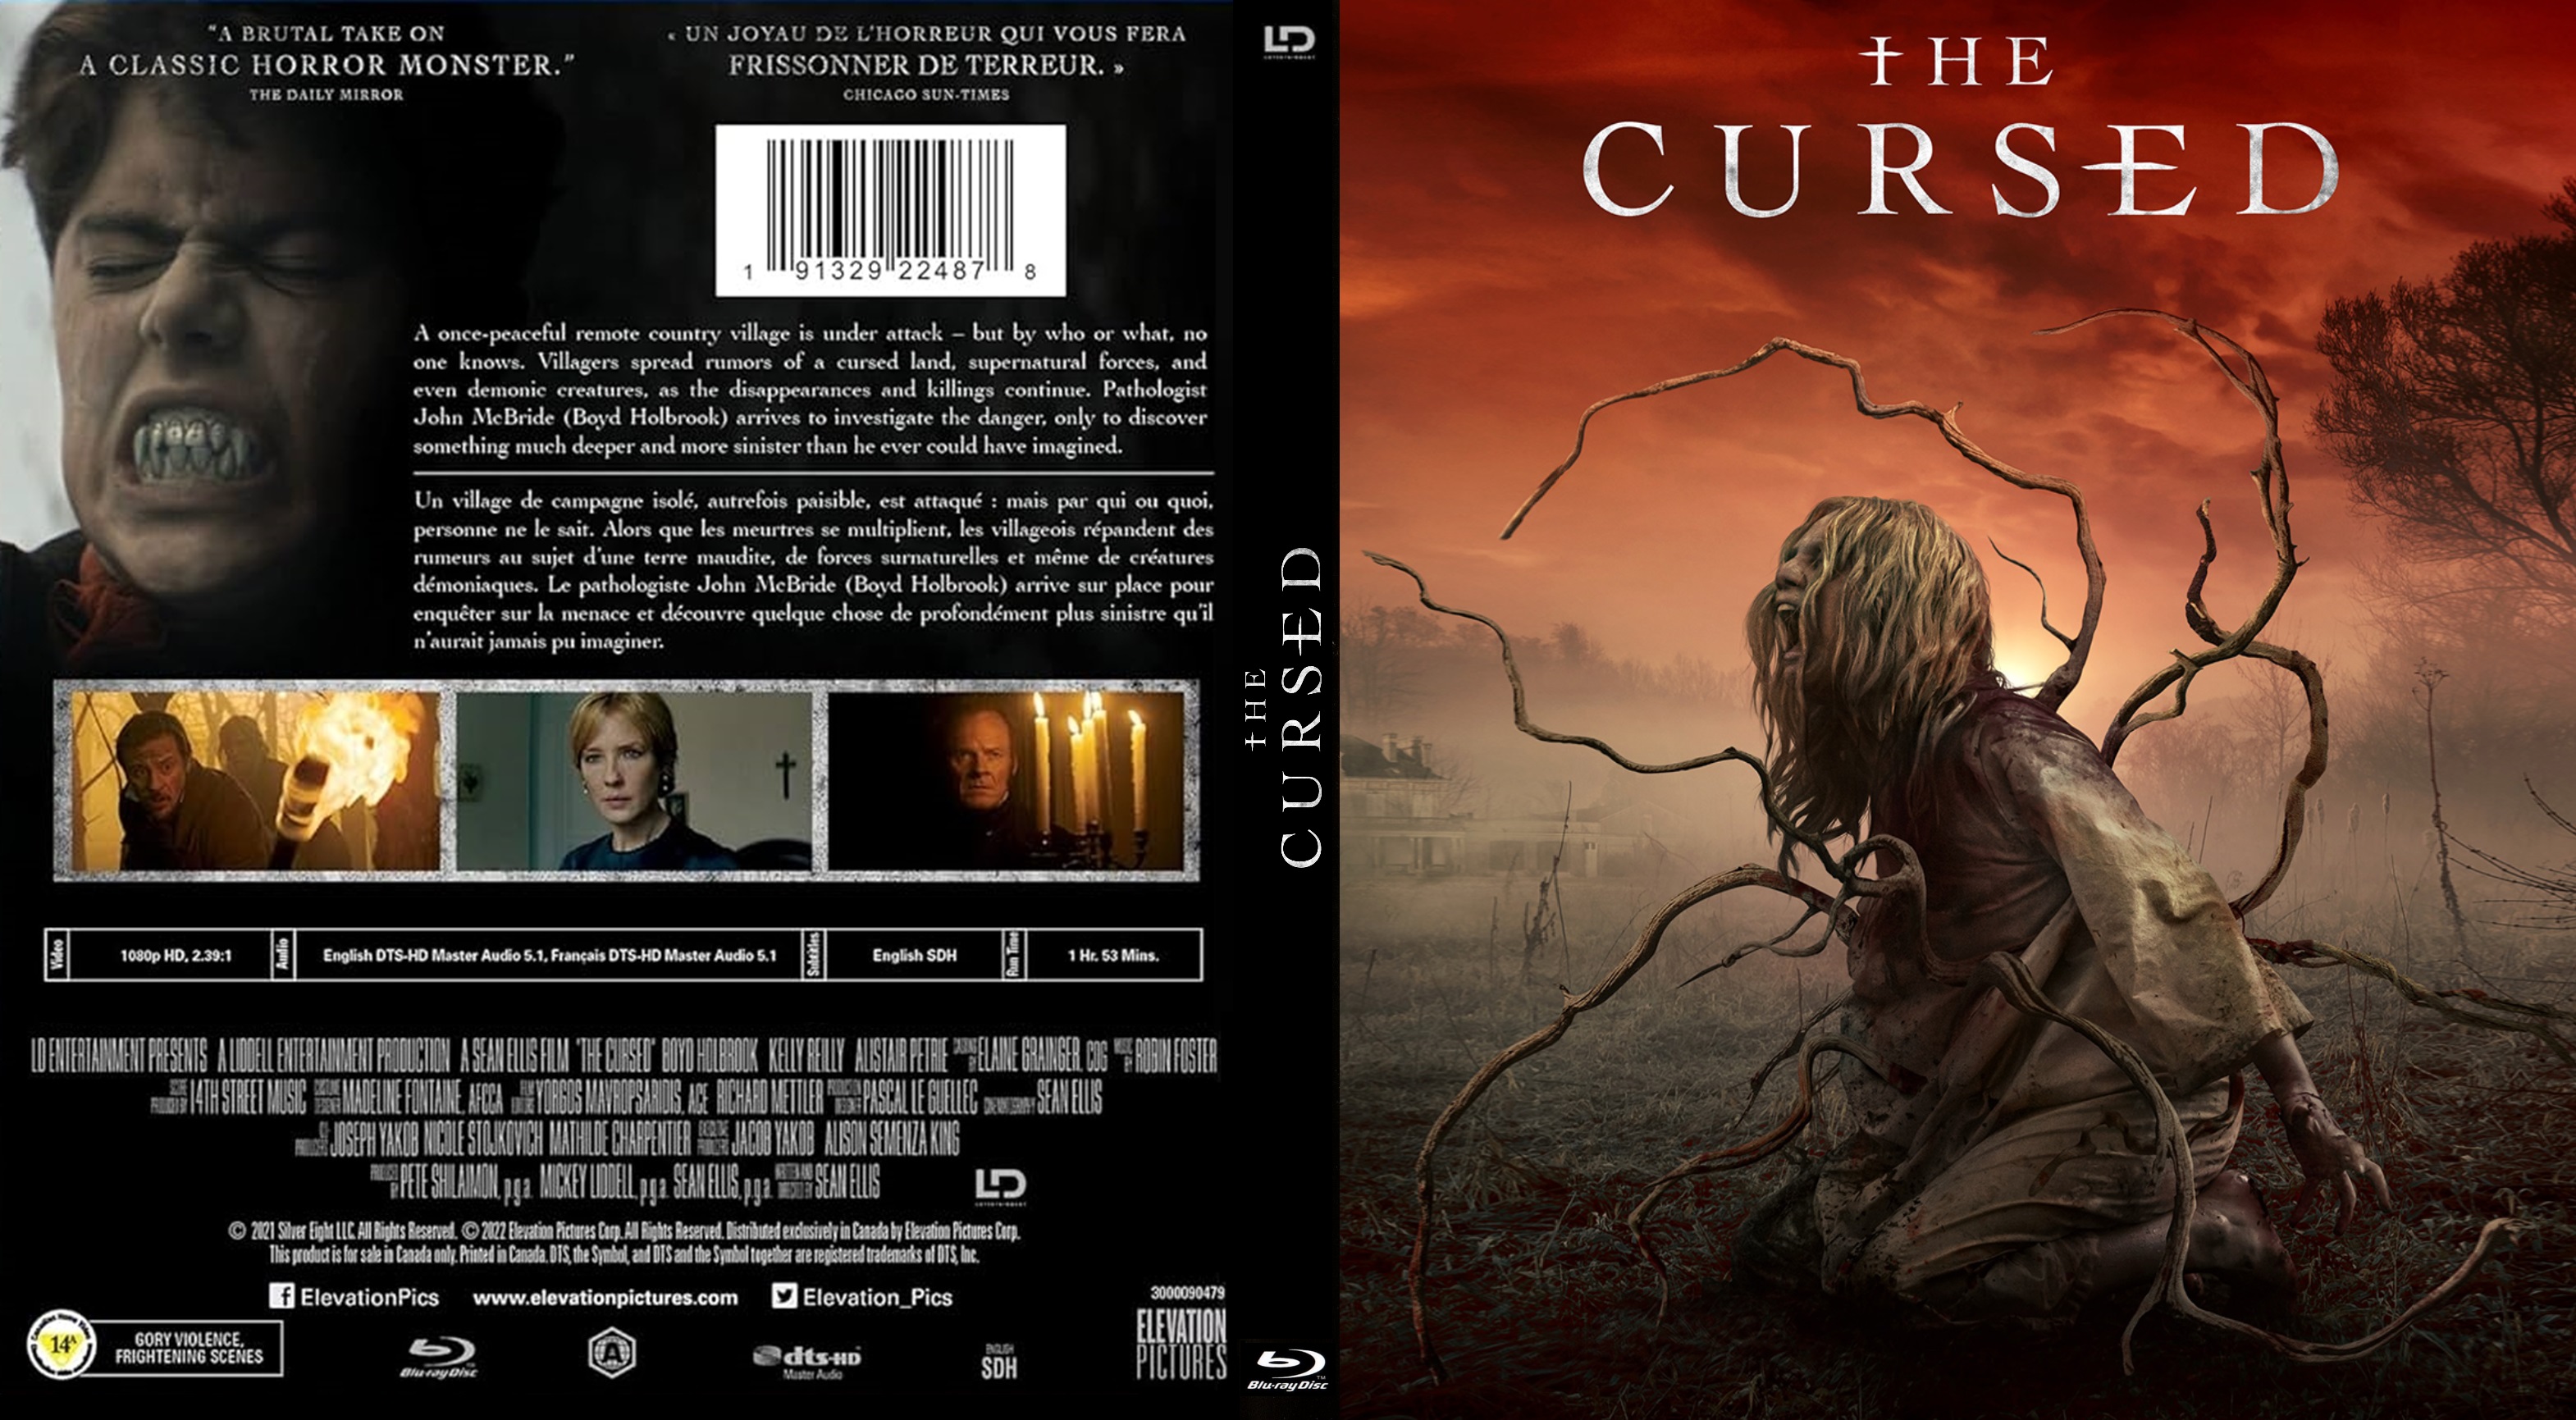 Jaquette DVD The cursed custom (BLU-RAY)